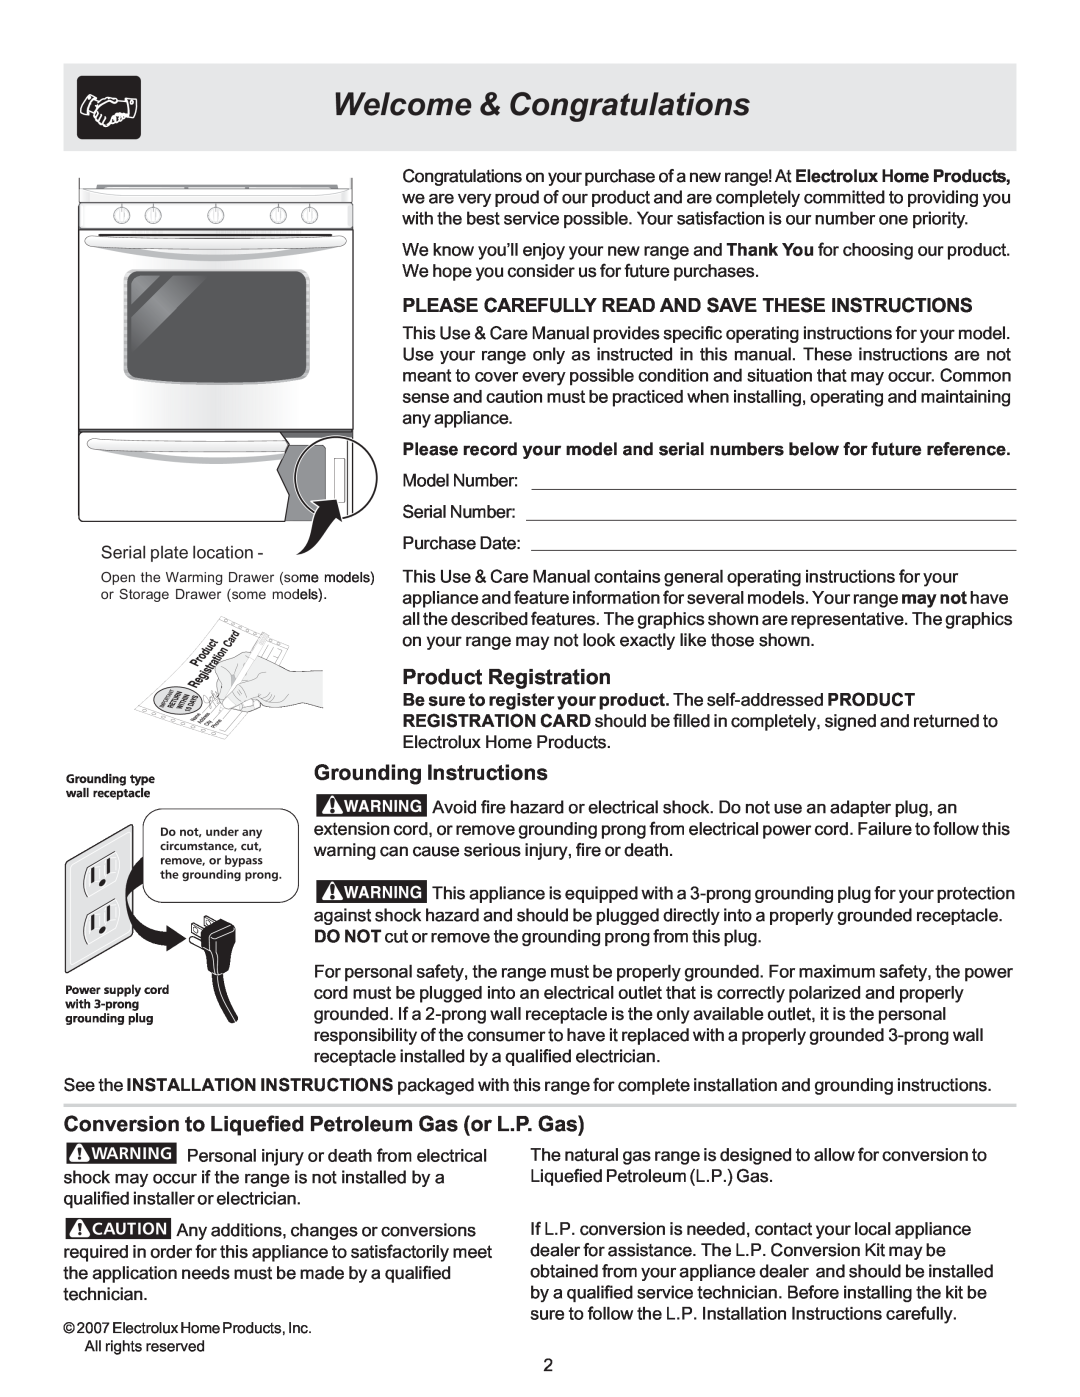 Electrolux ES510L manual Welcome & Congratulations, Product Registration, Grounding Instructions 